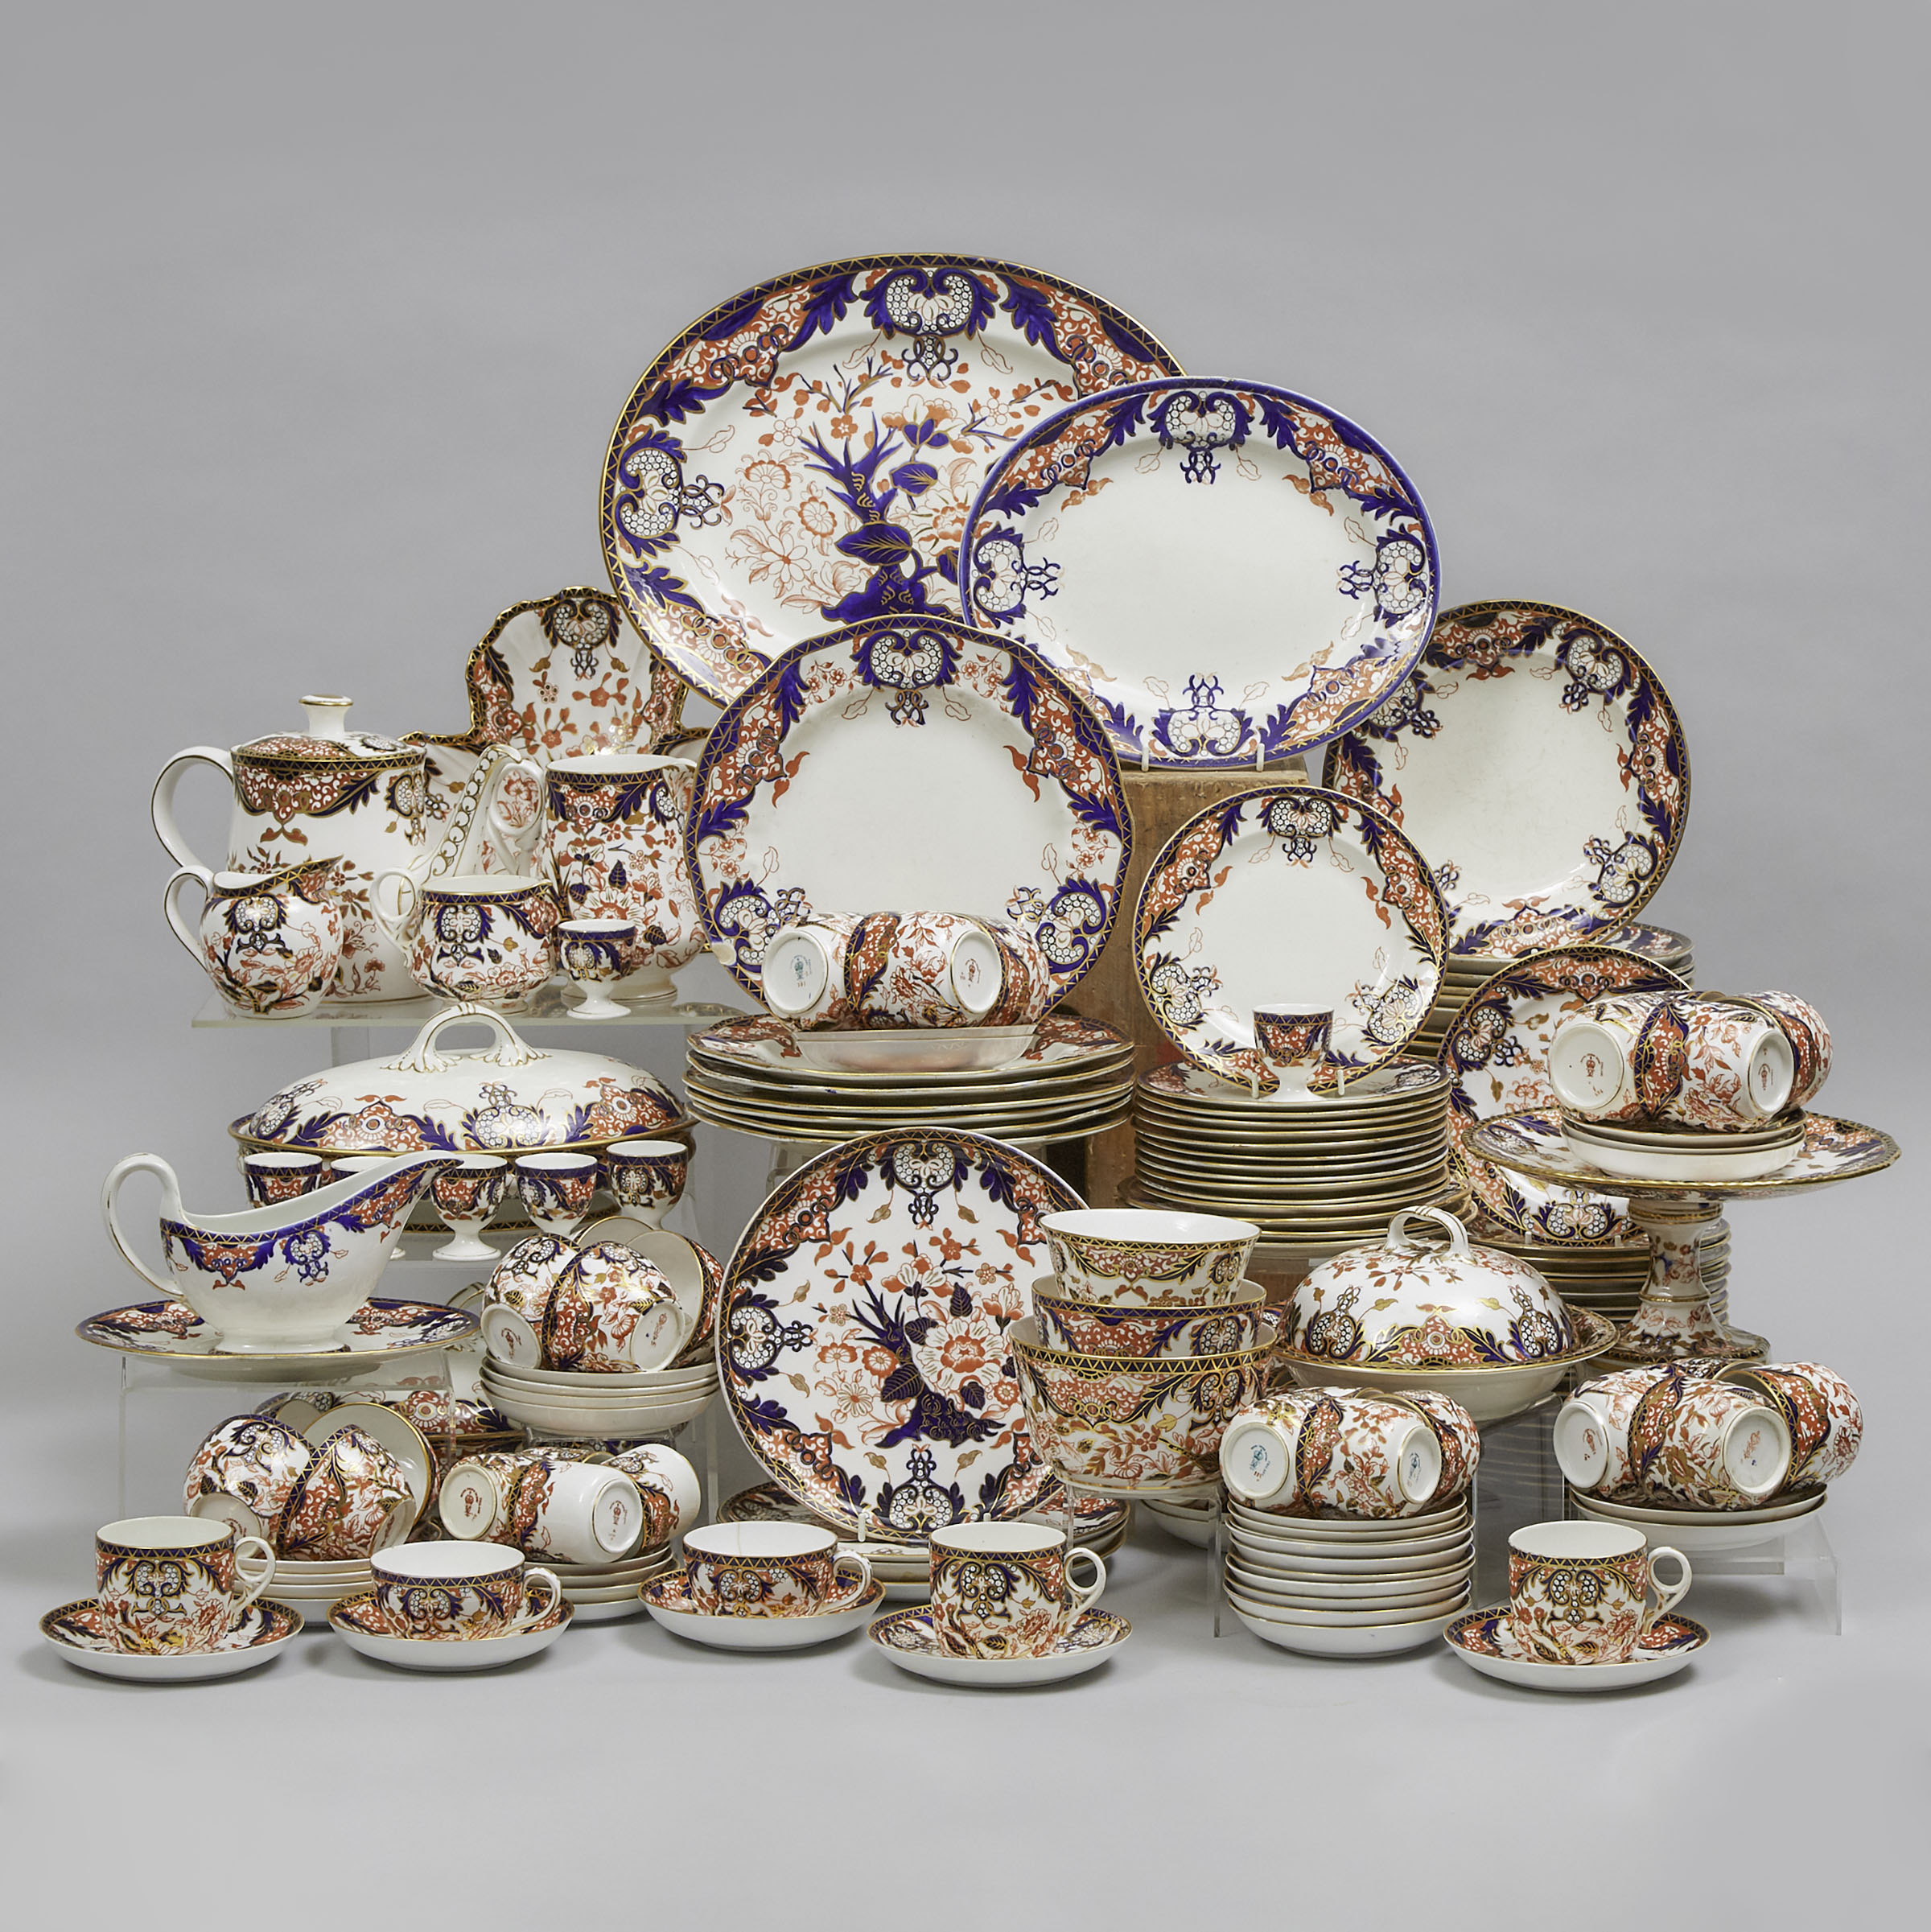 Royal Crown Derby 'Kings' (1270, 3590, 3615, 383, and 563) Pattern Service, late 19th/20th century